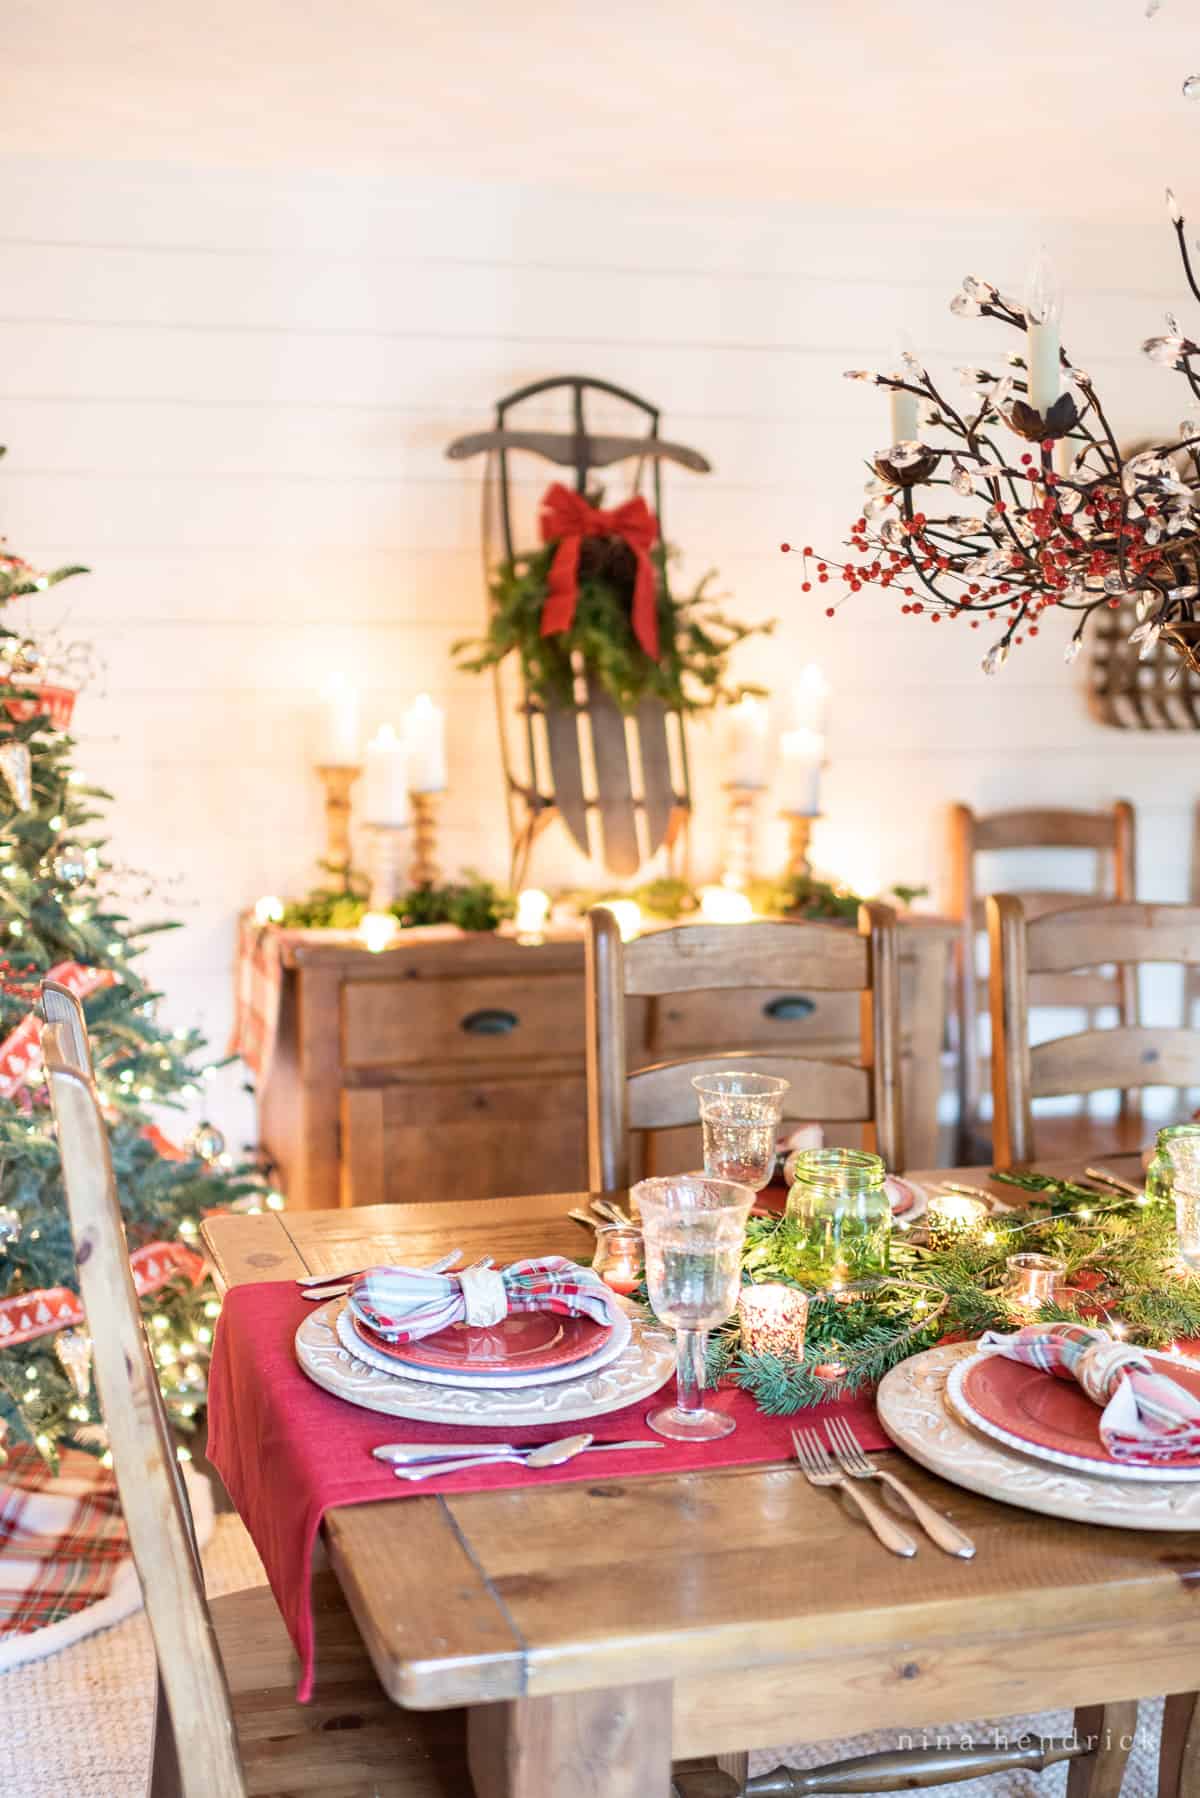 Holiday table setting ideas with red and green accents